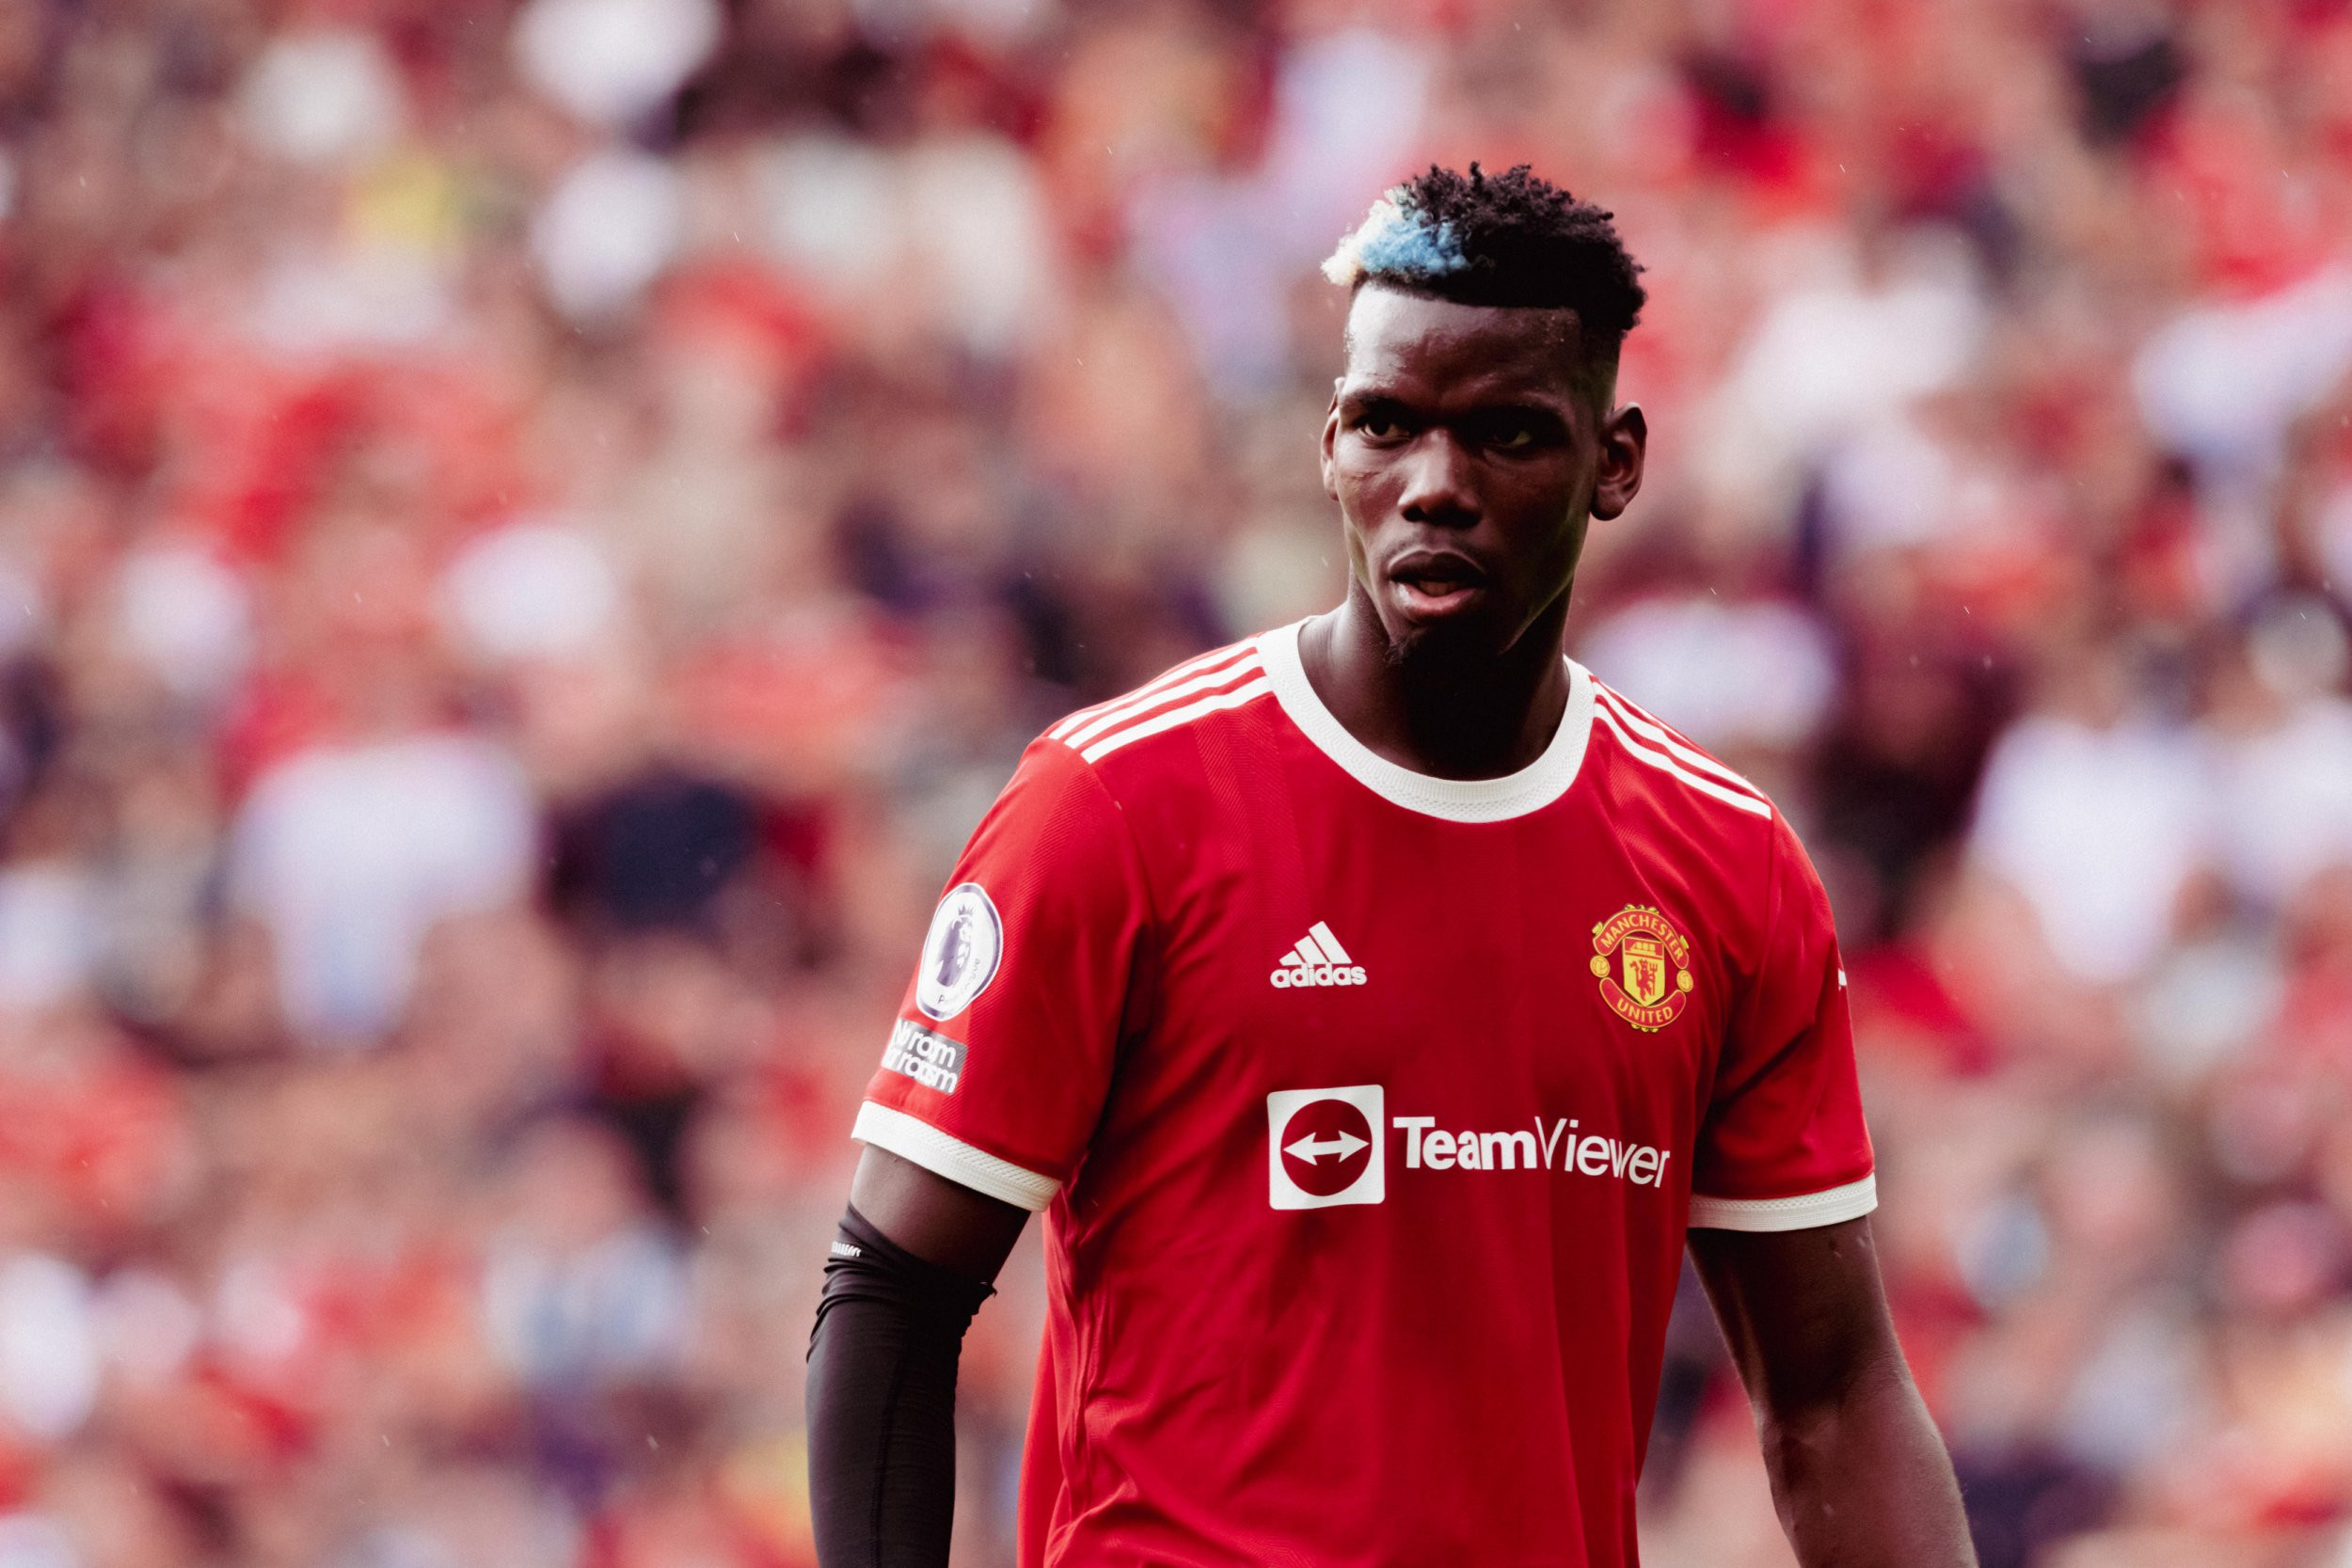 Paul Pogba to be offered mammoth contract to join PSG on free transfer from Manchester United